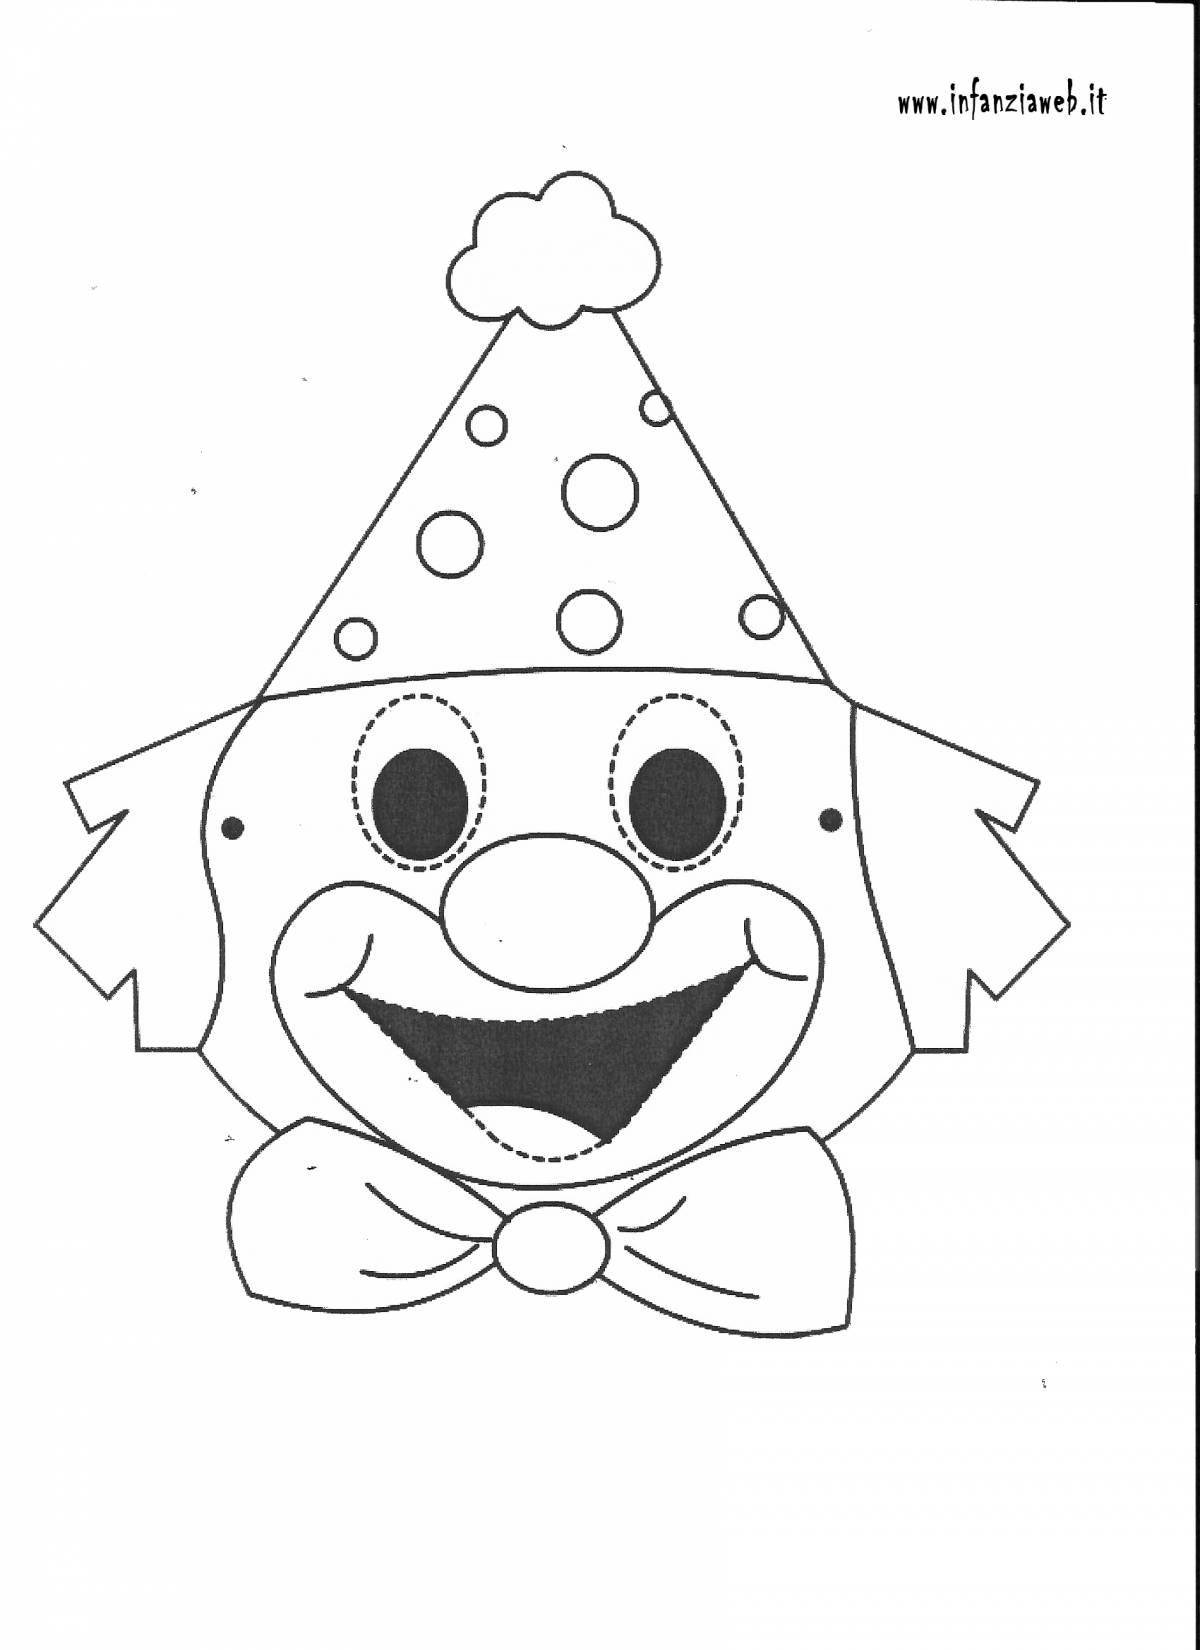 Coloring page hypnotic clown mask